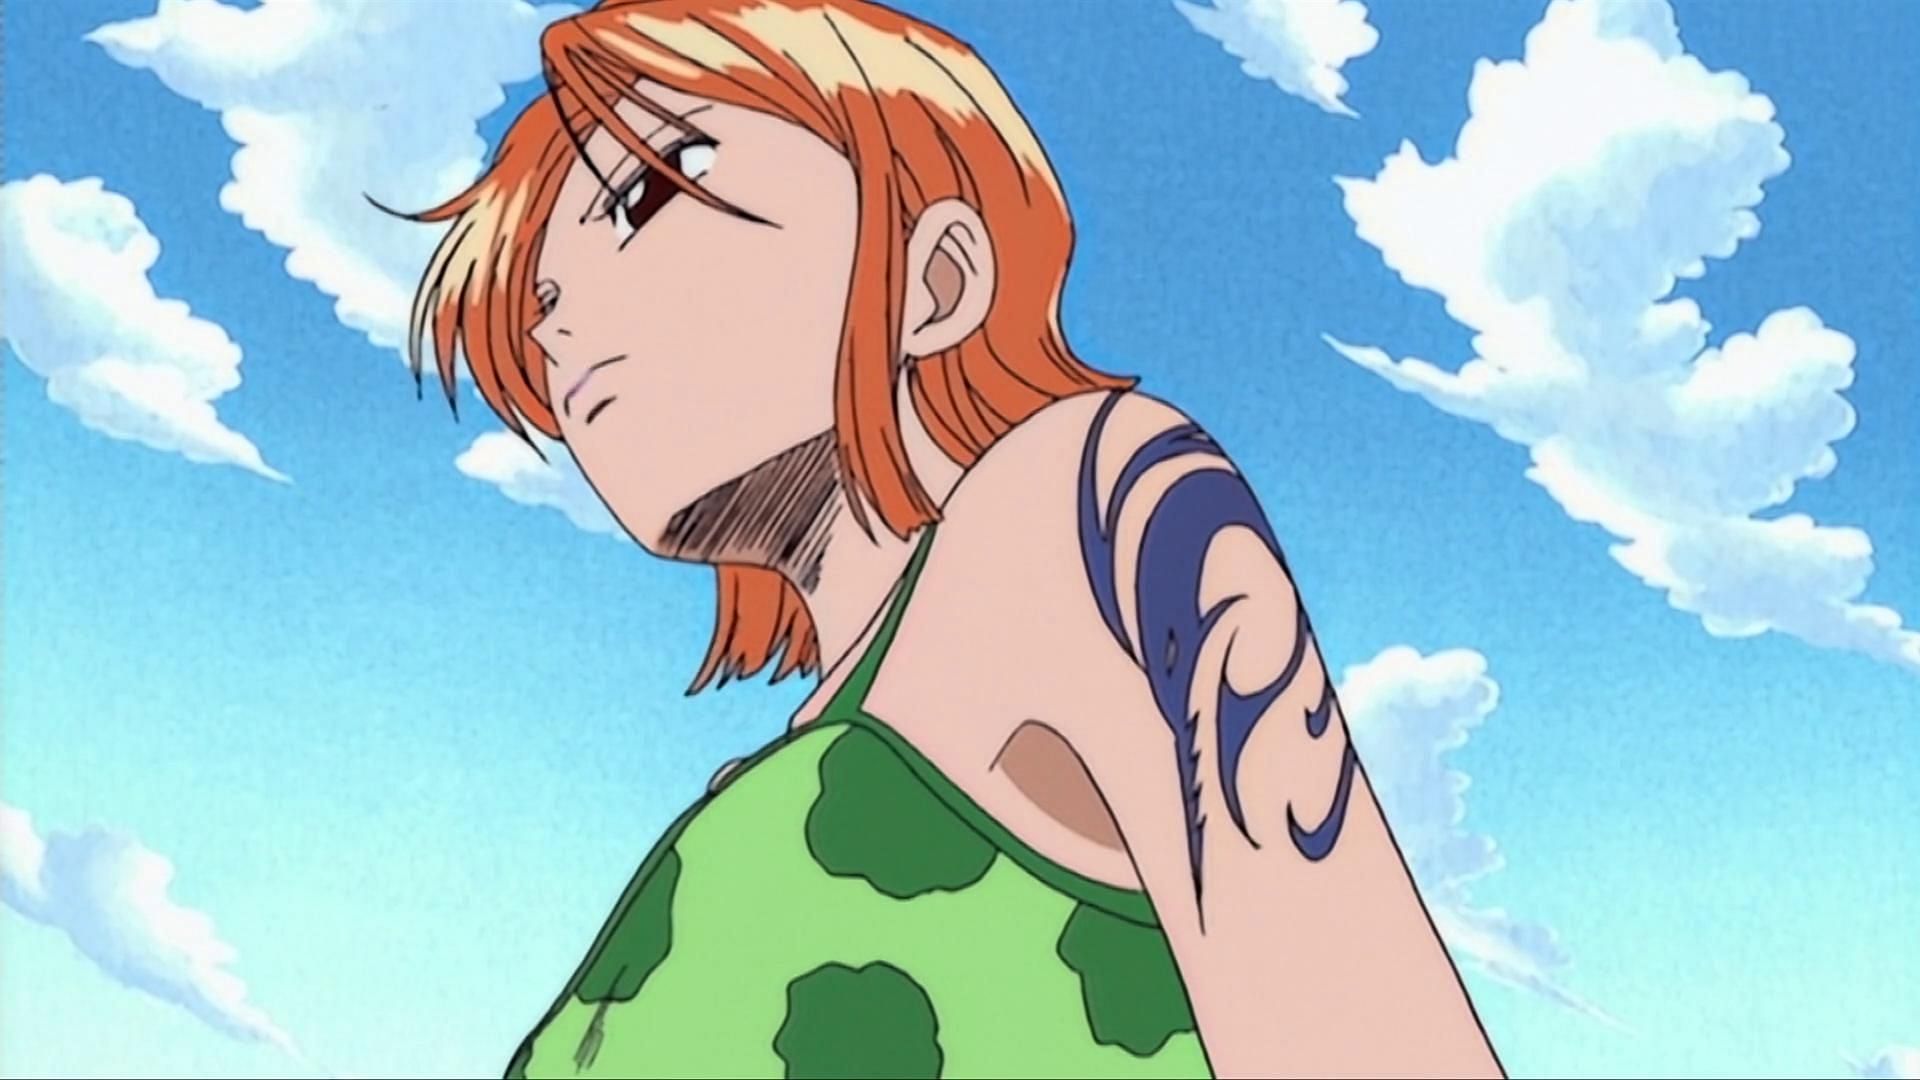 Nami in her Arlong Park outfit (Image via Toei Animation, One Piece)